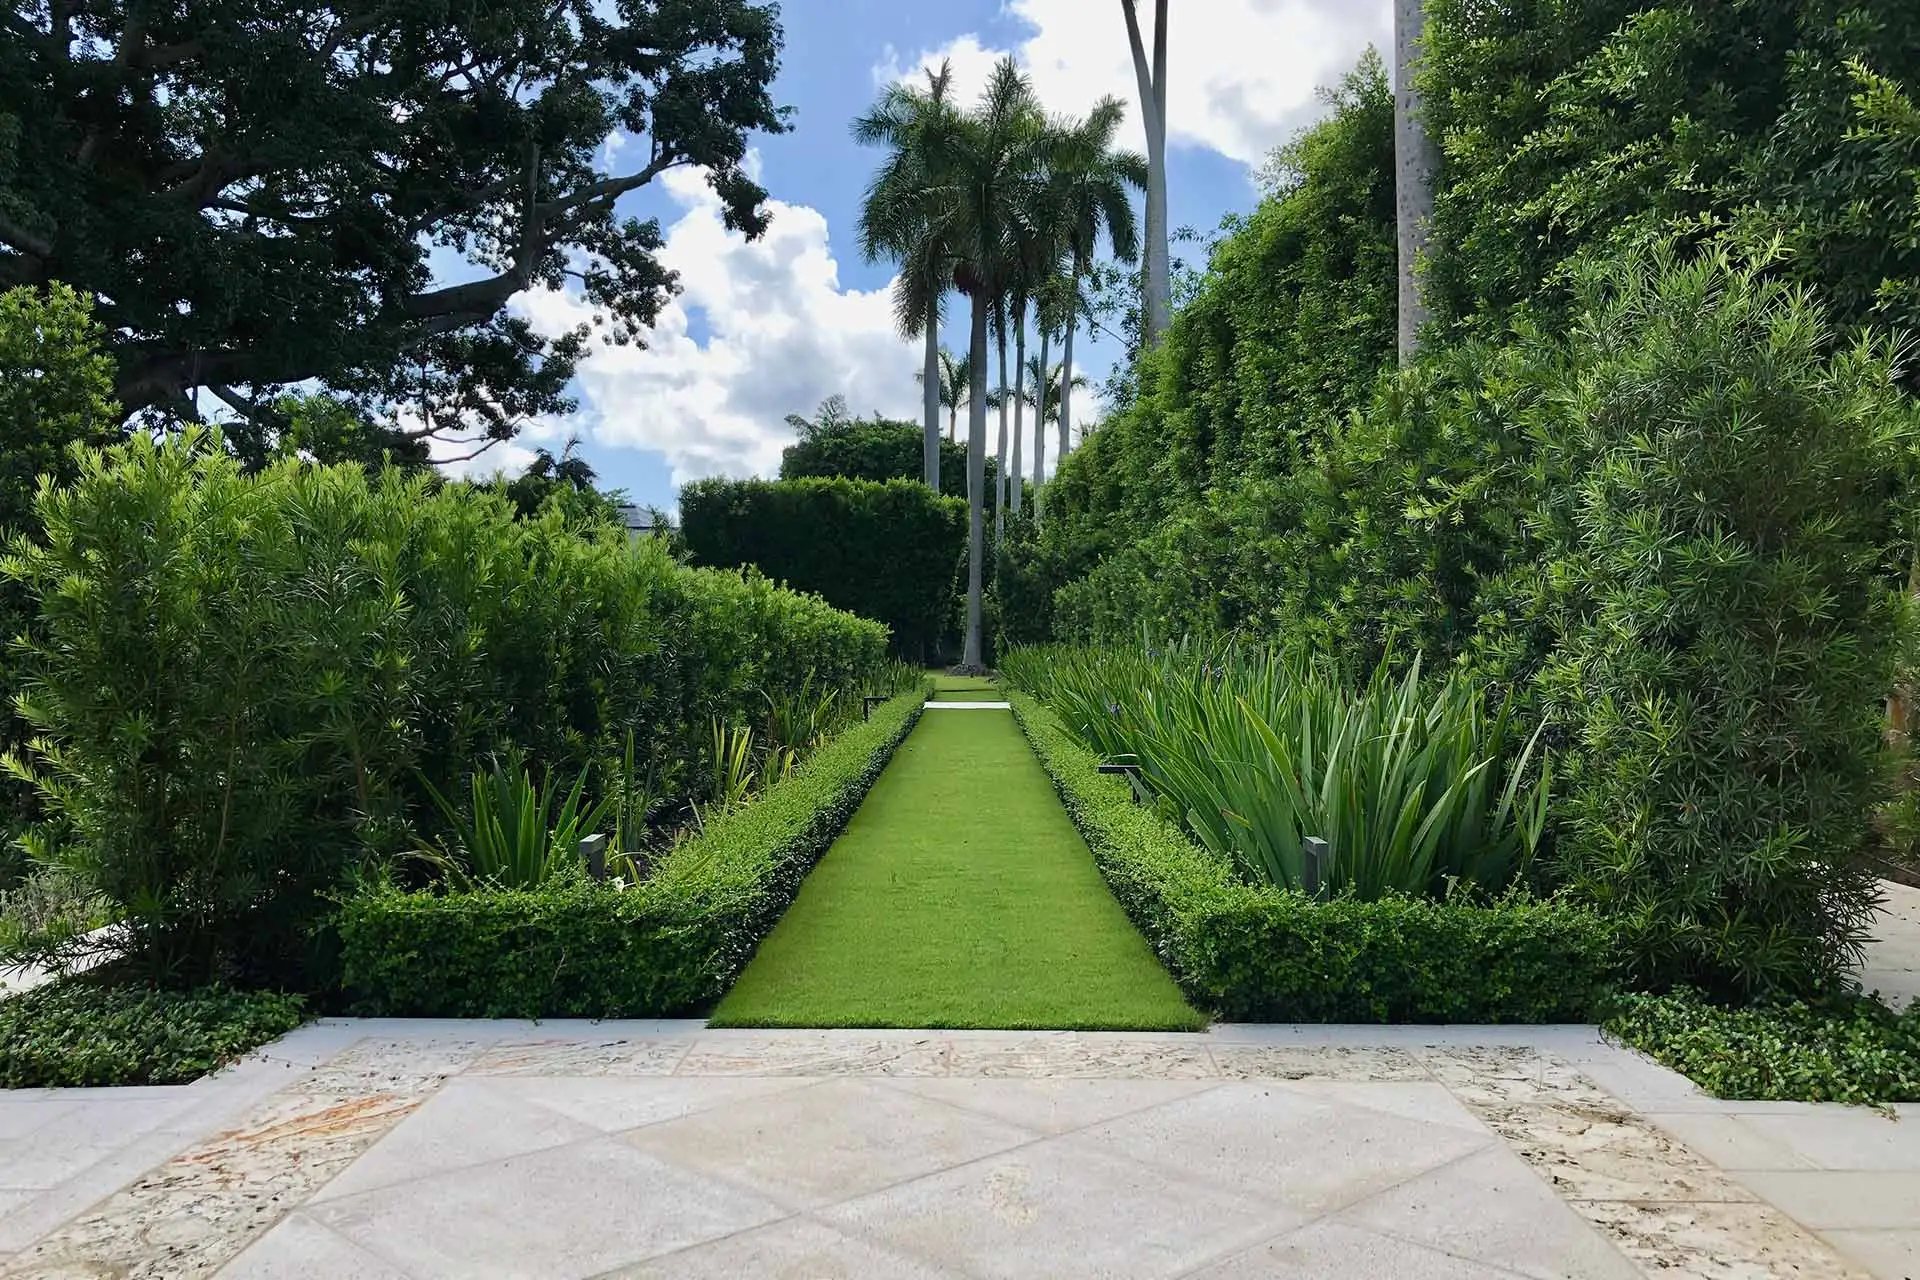 Landscaping and garden path at an estate in Palm Beach, FL.